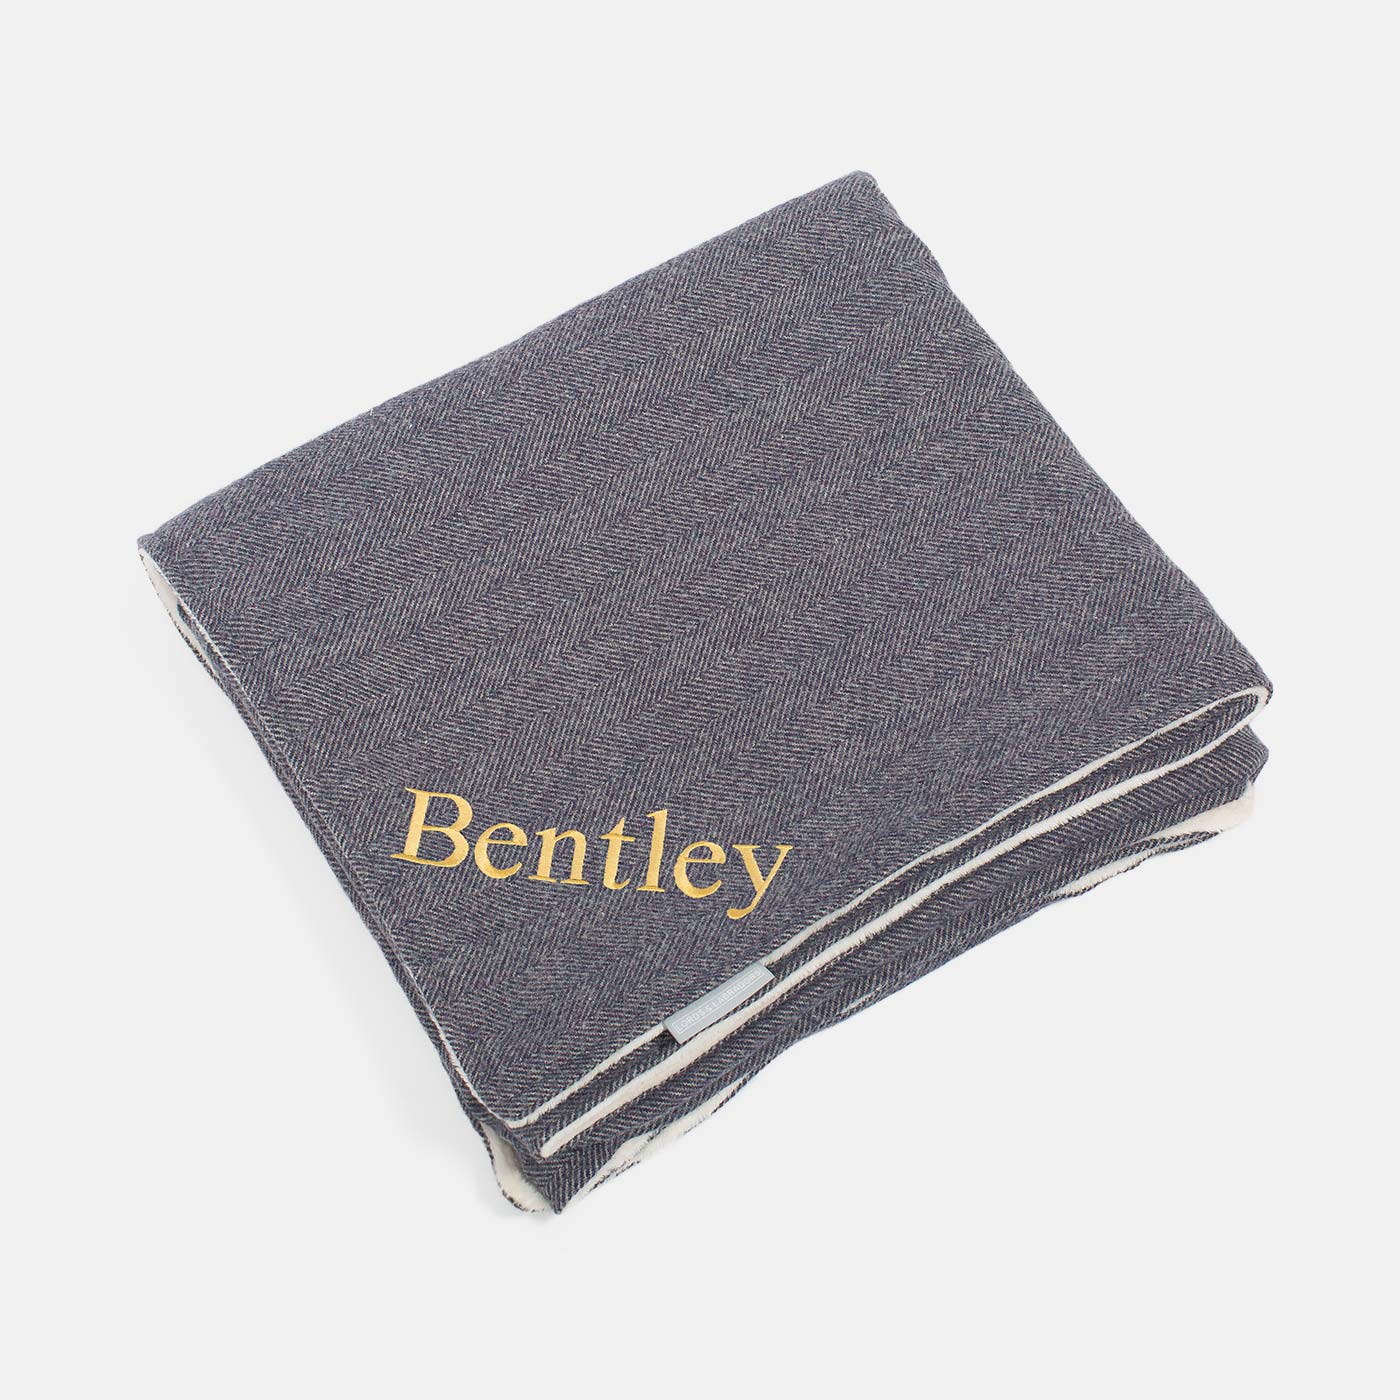 Discover Our Luxurious Oxford Herringbone Tweed Dog Blanket With Super Soft Sherpa & Teddy Fleece, The Perfect Blanket For Puppies, Available To Personalise And In 2 Sizes Here at Lords & Labradors